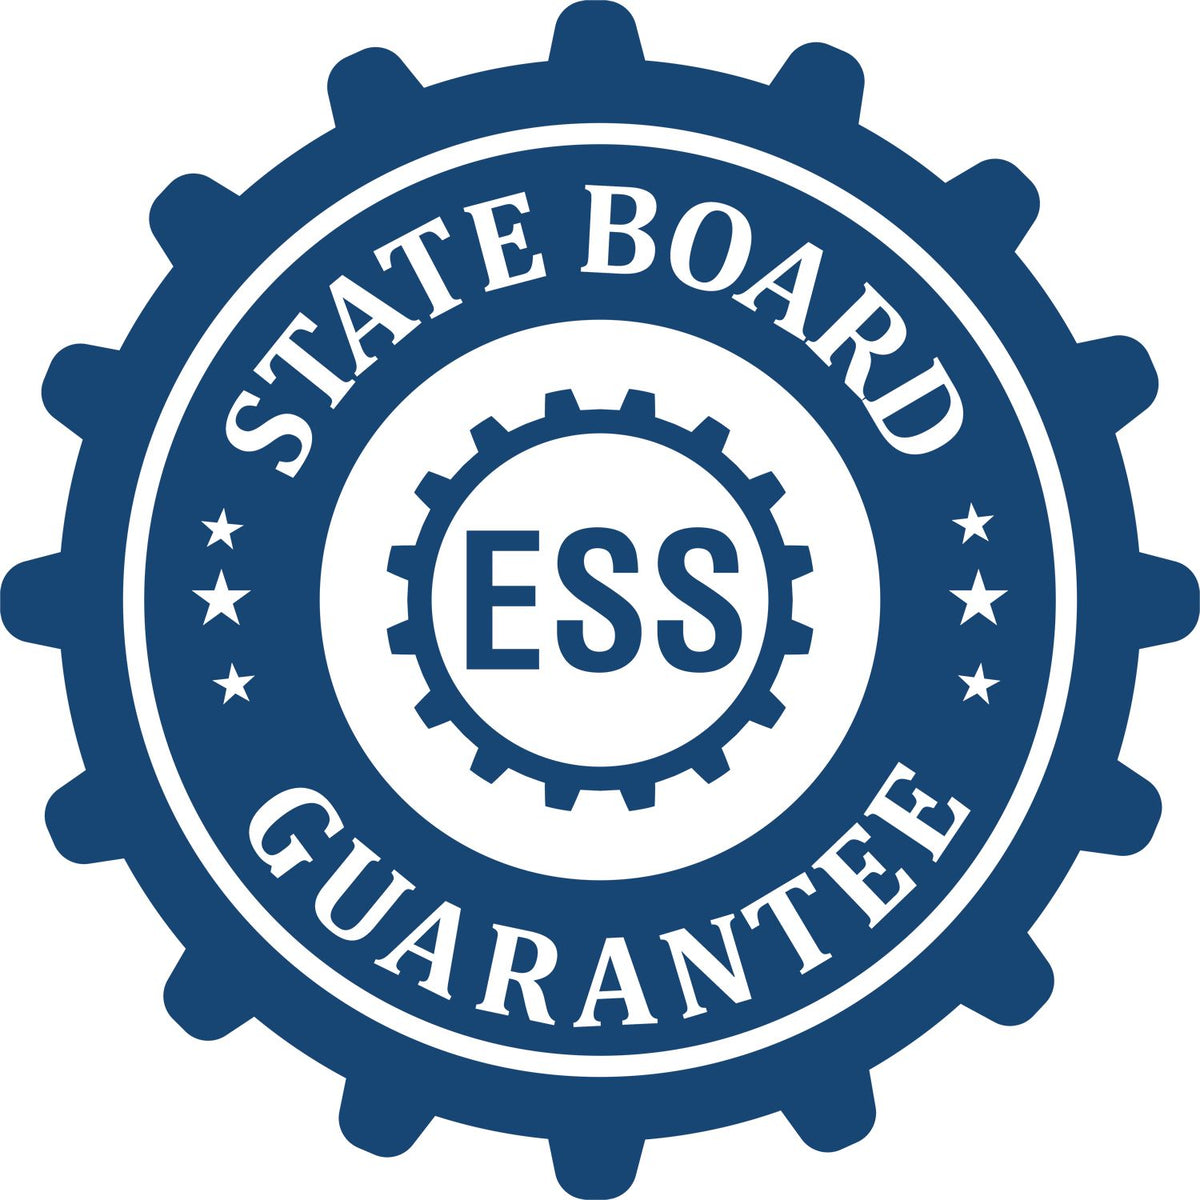 An emblem in a gear shape illustrating a state board guarantee for the Hybrid Maine Architect Seal